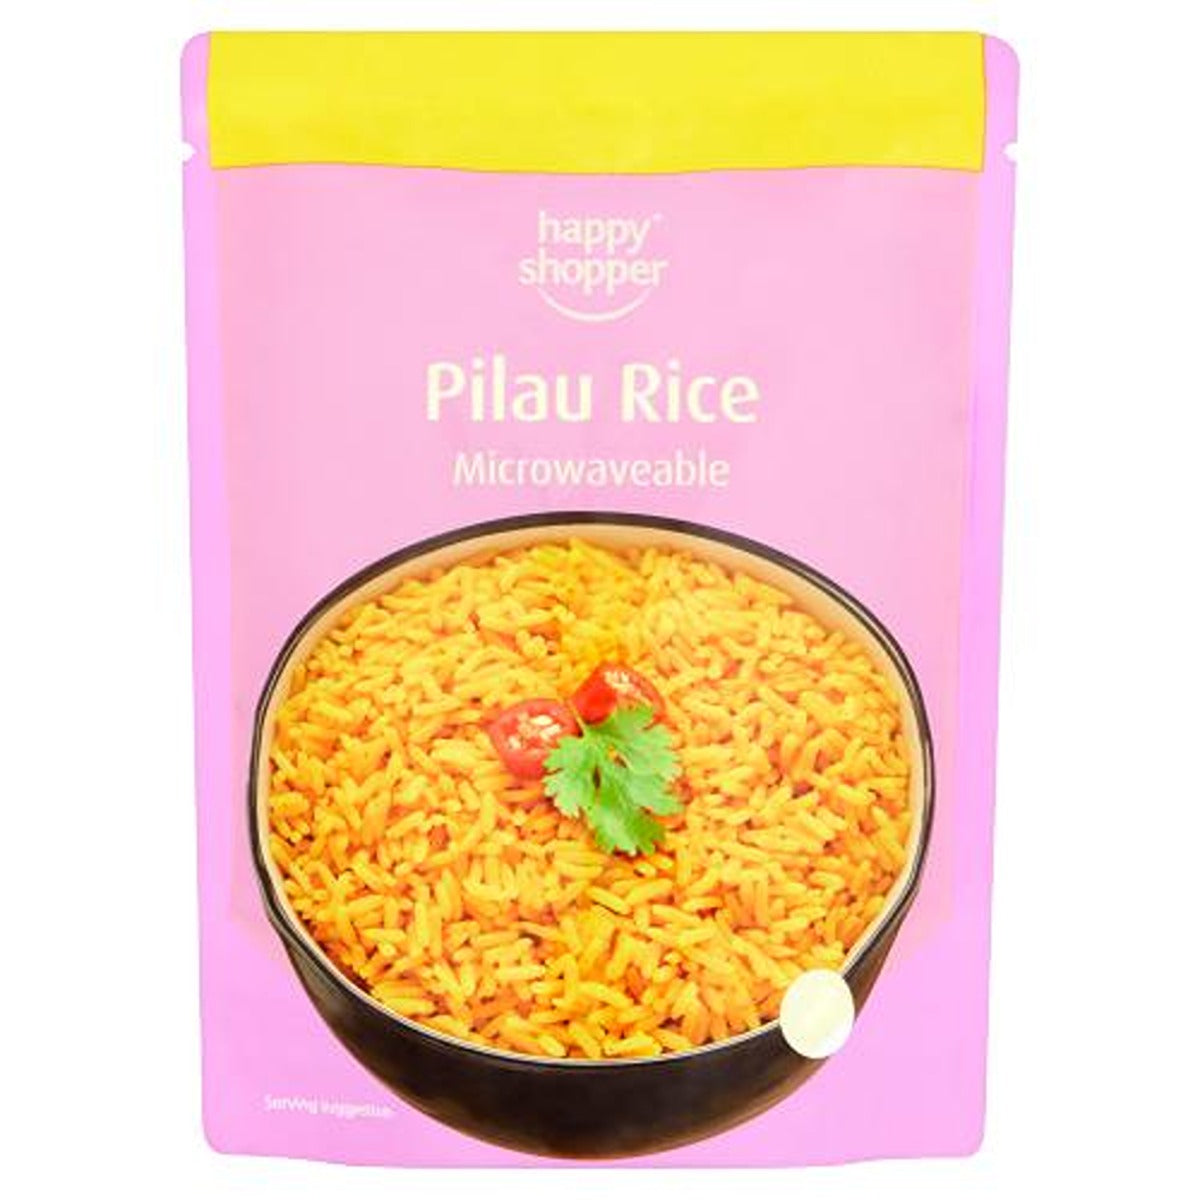 Happy Shopper - Pilau Rice Microwaveable - 250g - Continental Food Store